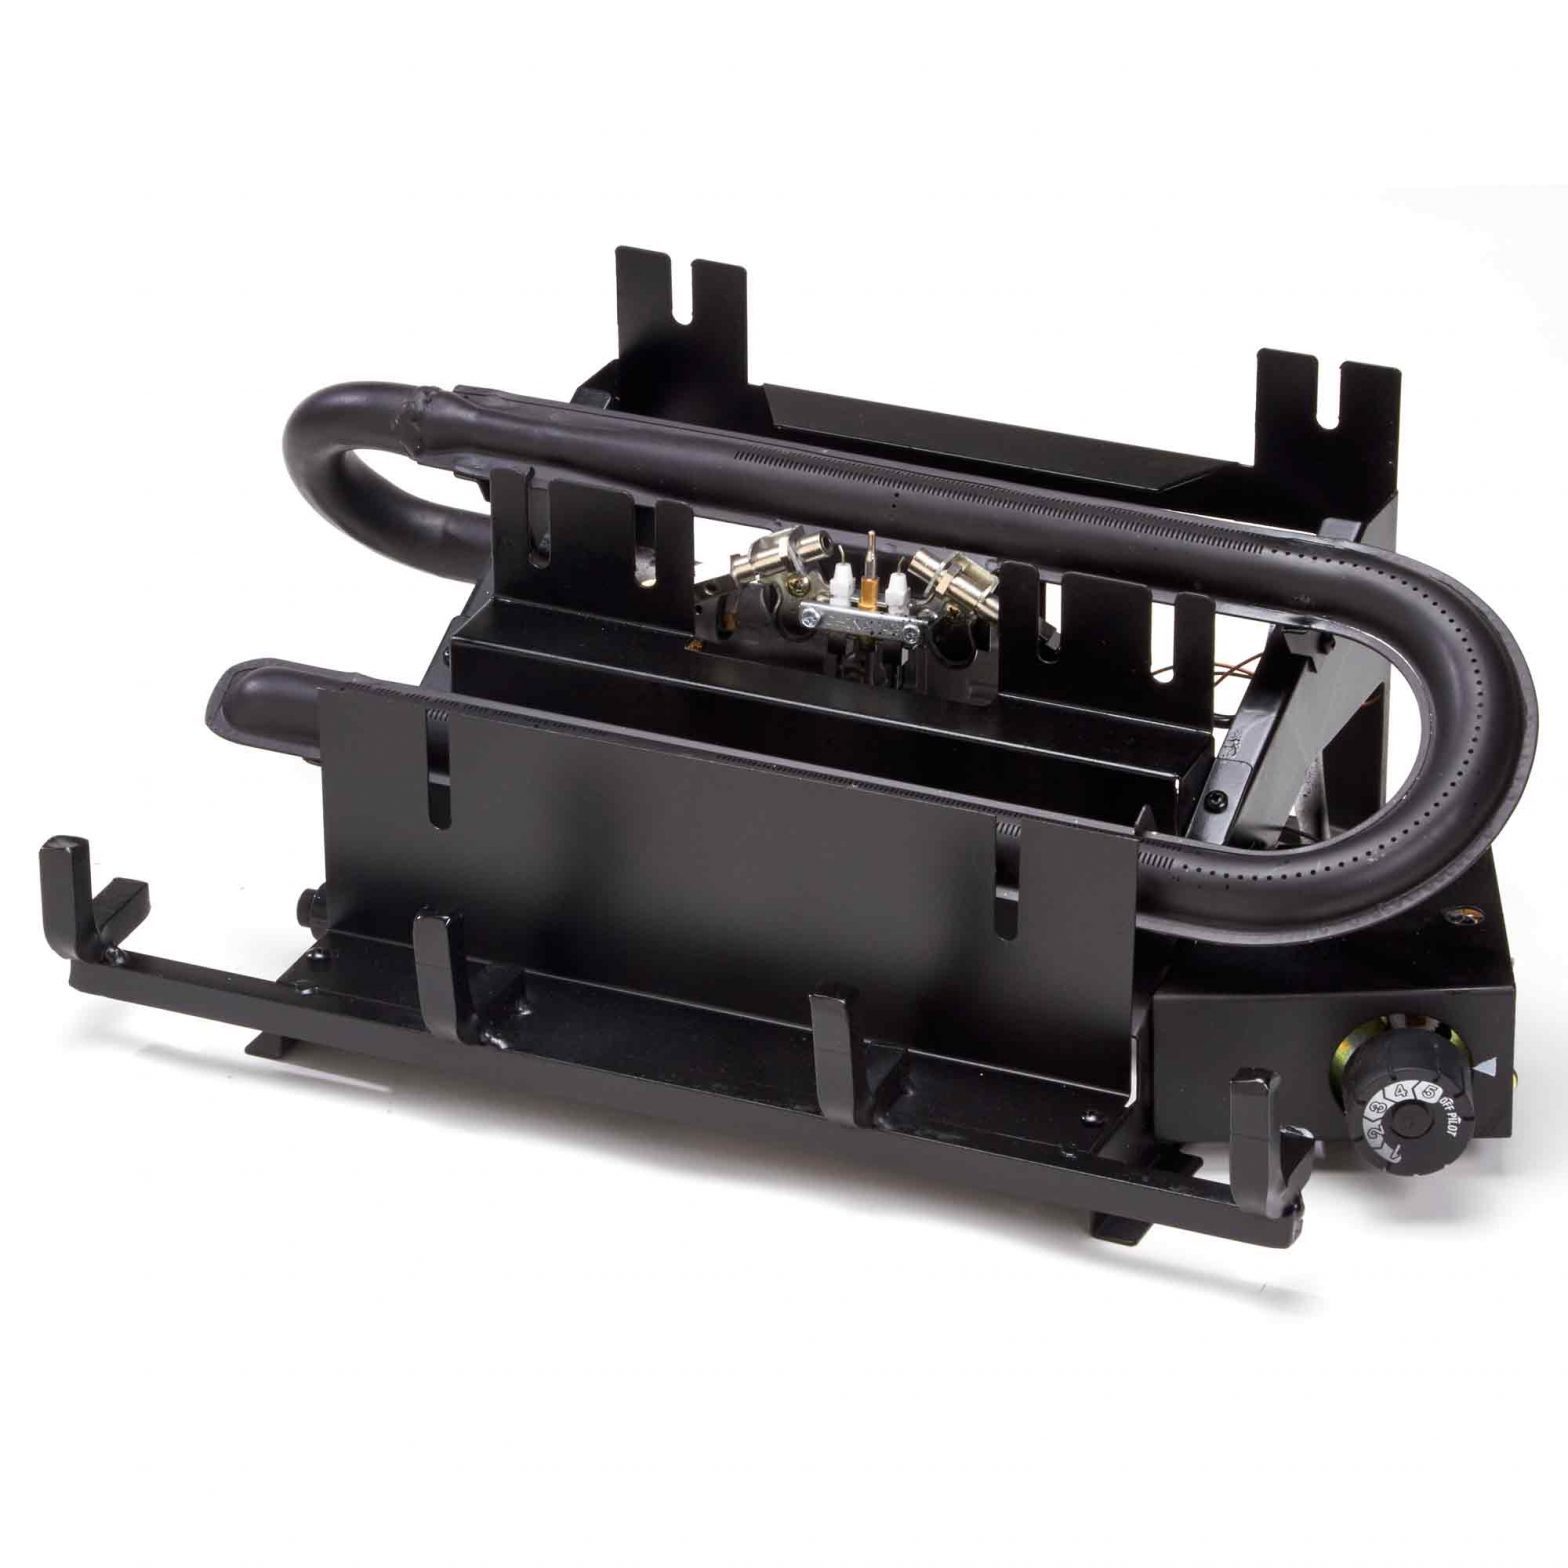 Duluth Forge Vent-Free Gas Log Chassis FDLR18-1 User Manual